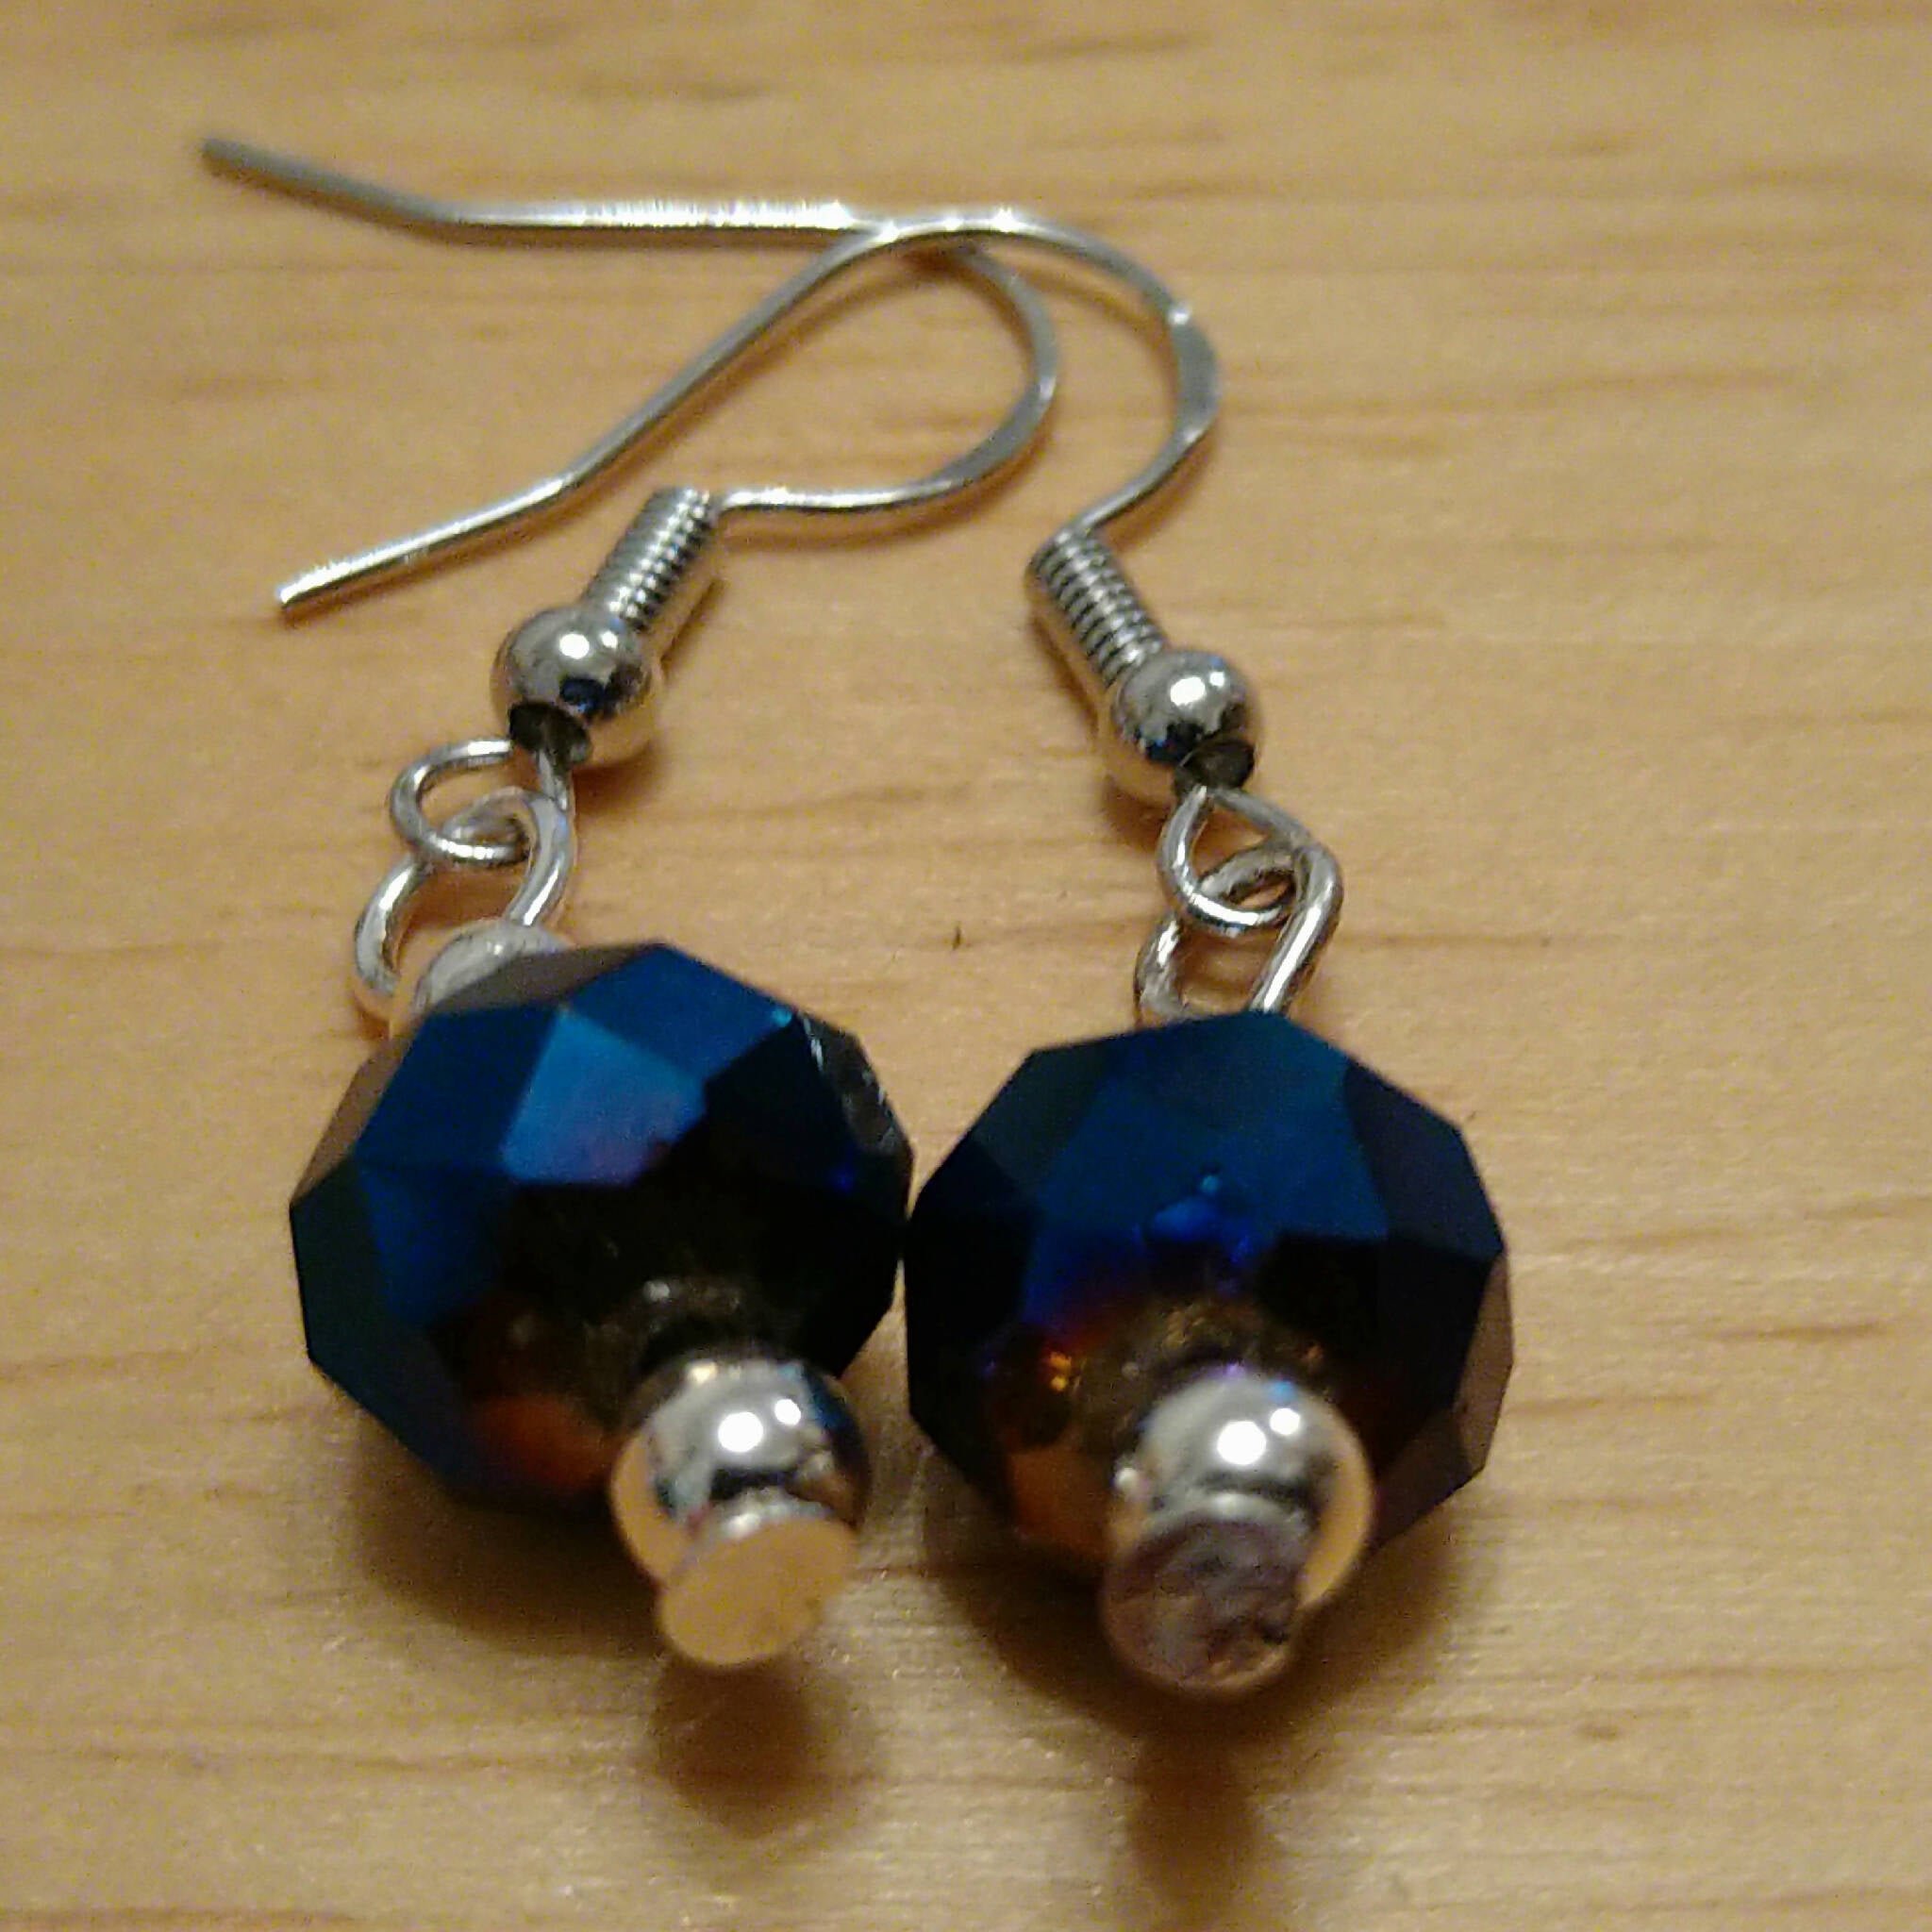 Handmade earrings with blue faceted AB bead